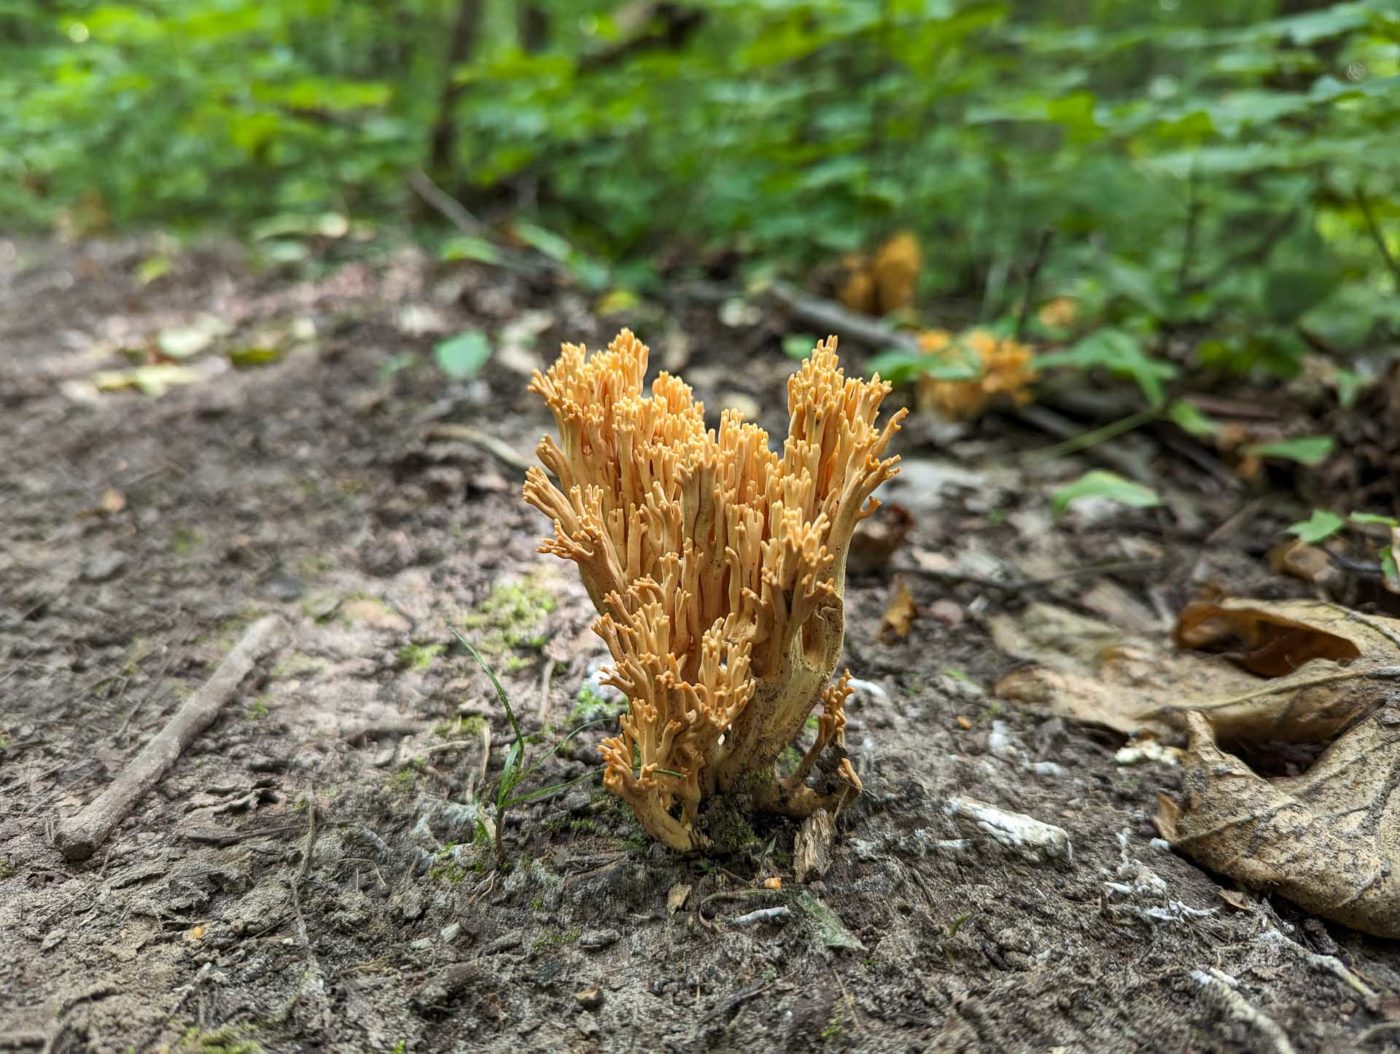 A fungus growing on a trail in the woods.